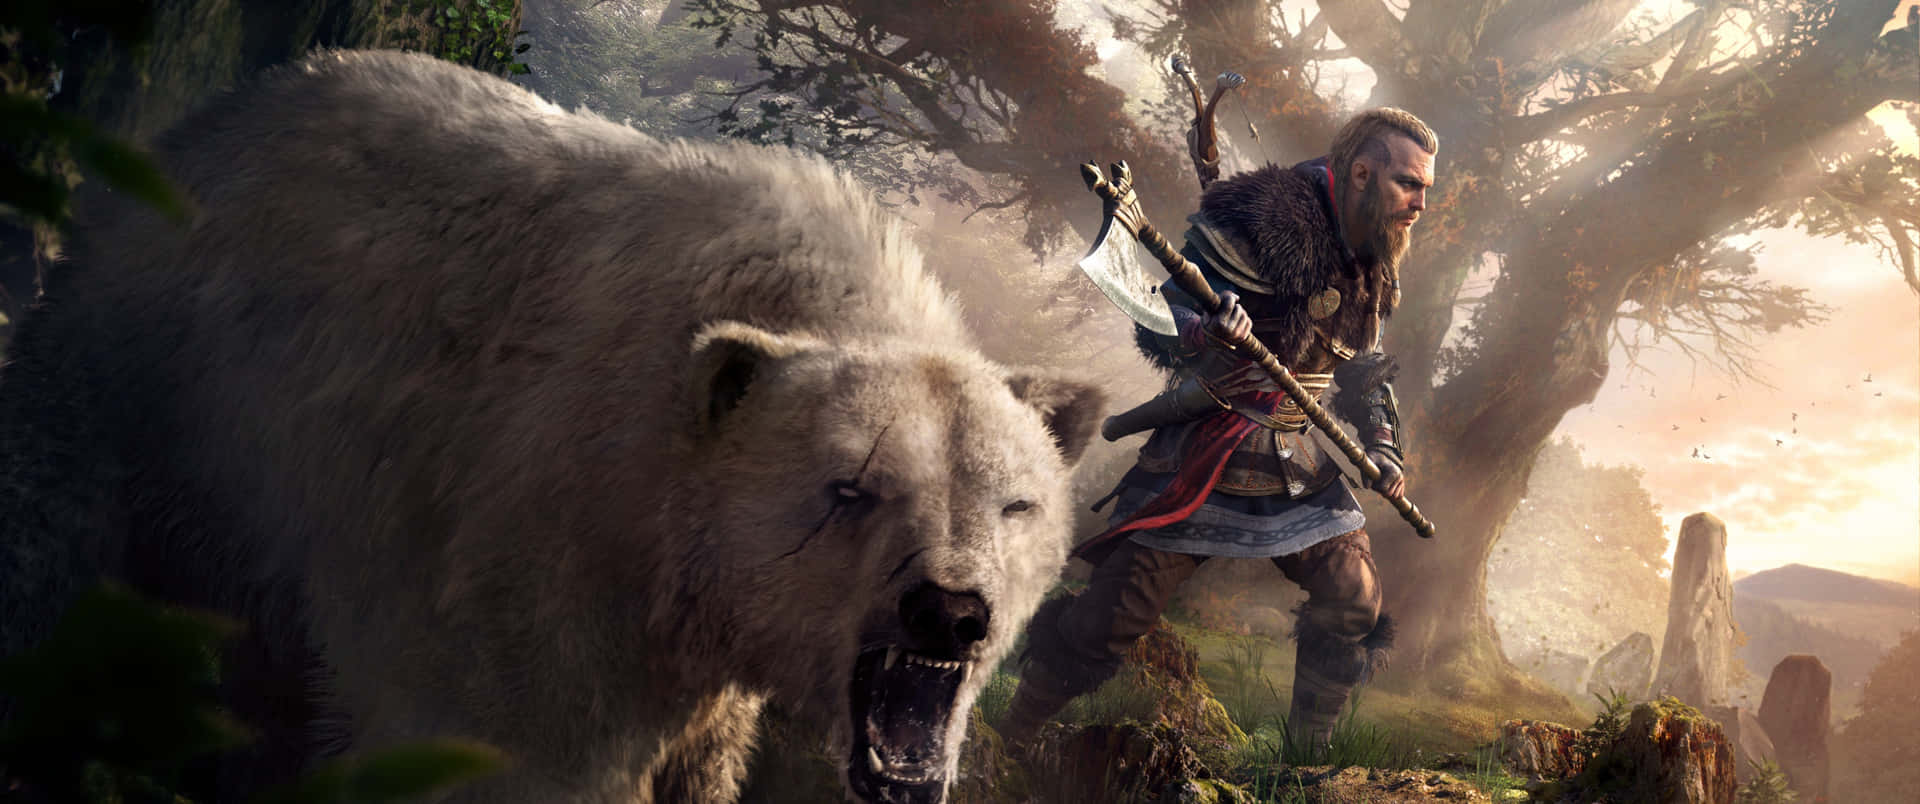 3440x1440p Assassin's Creed Odyssey Background Warrior And A Polar Bear Background